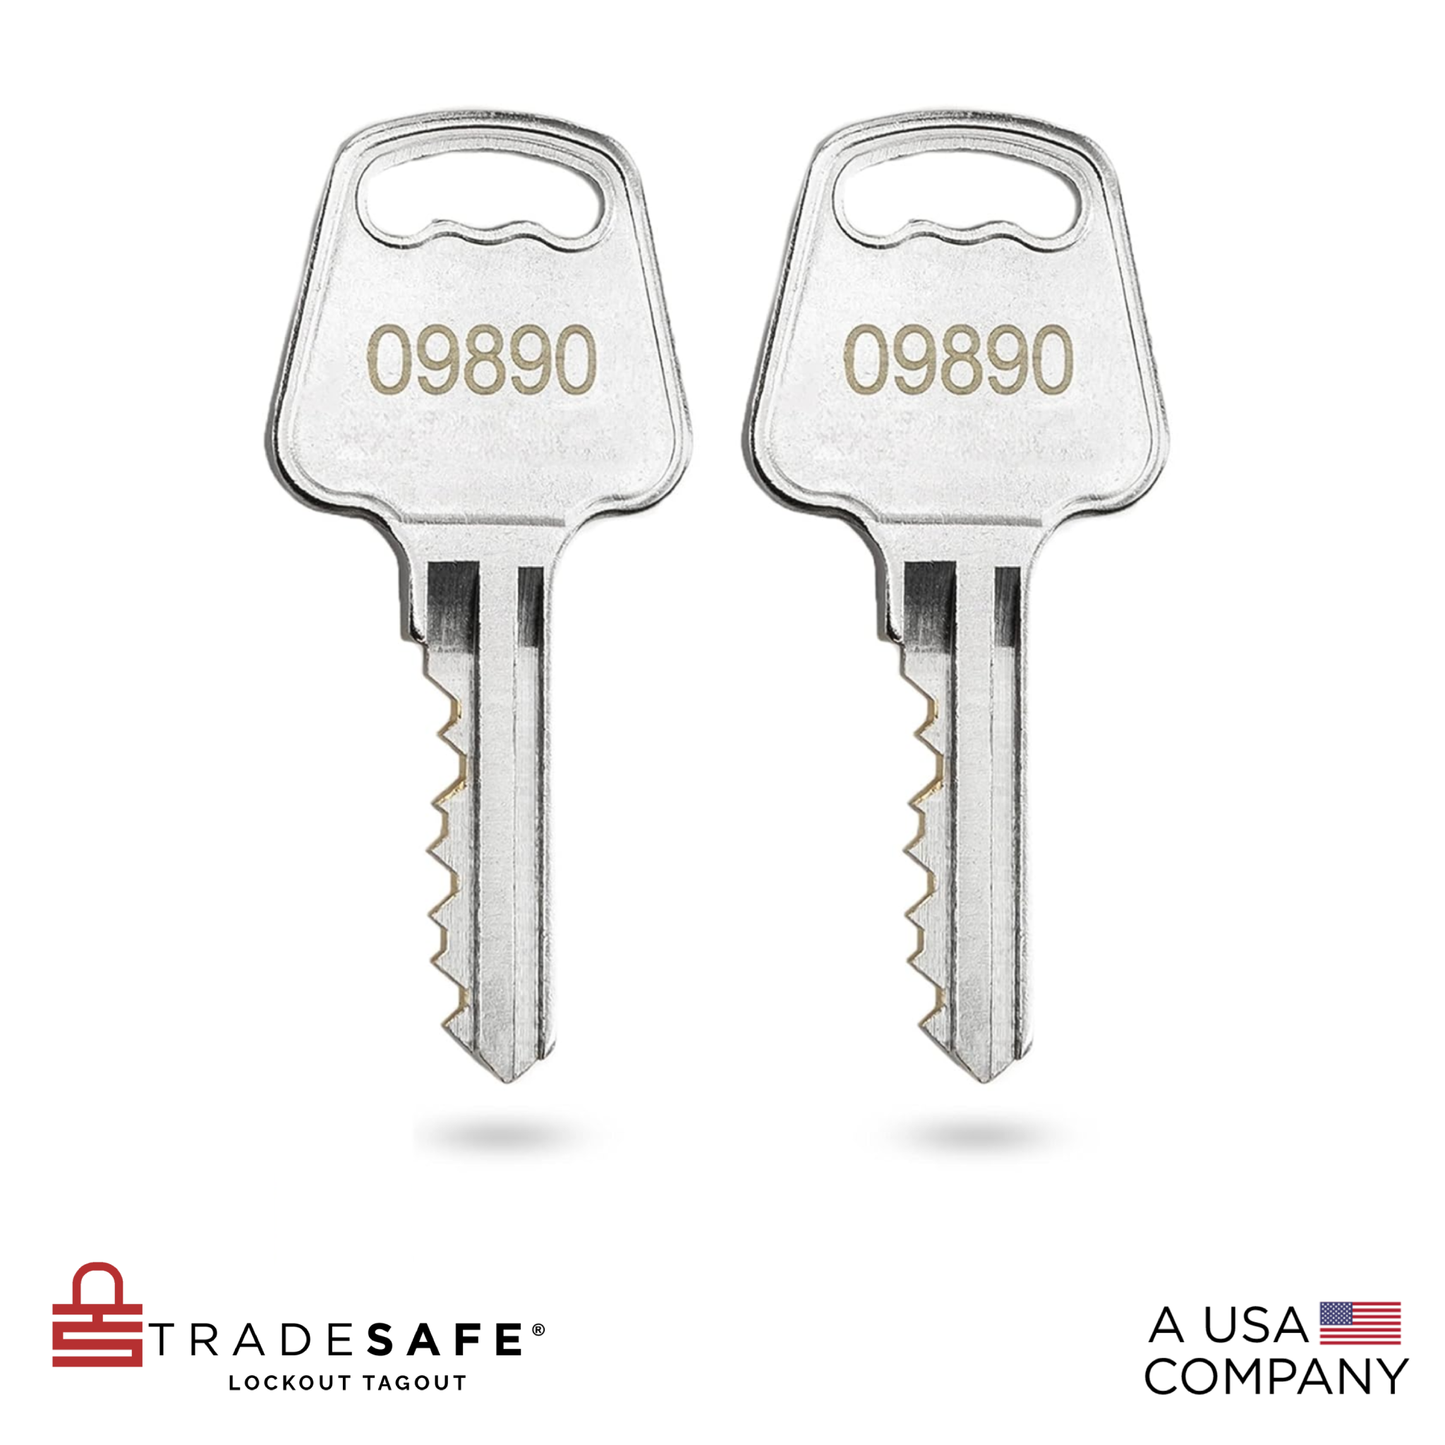 two keys, each with the five-digit code 09890